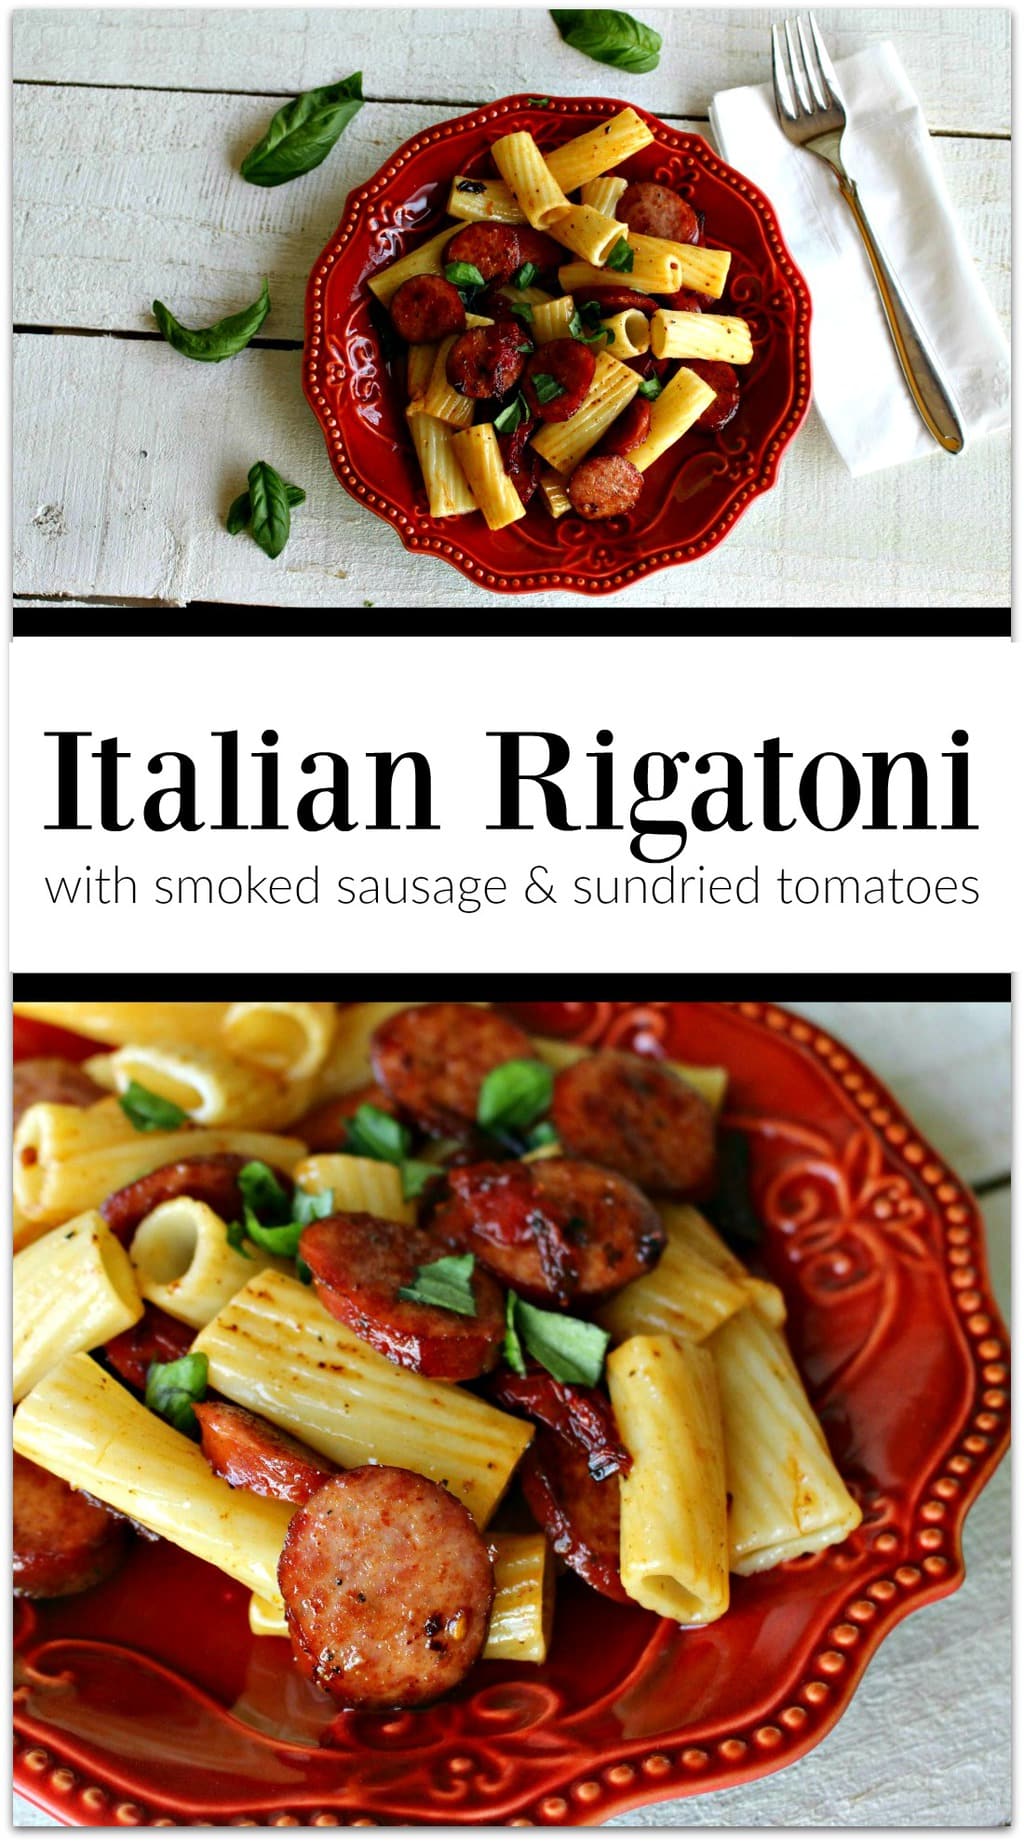 Rigatoni with tomatoes and sausage on a red plate on a white table with a fork and napkin.